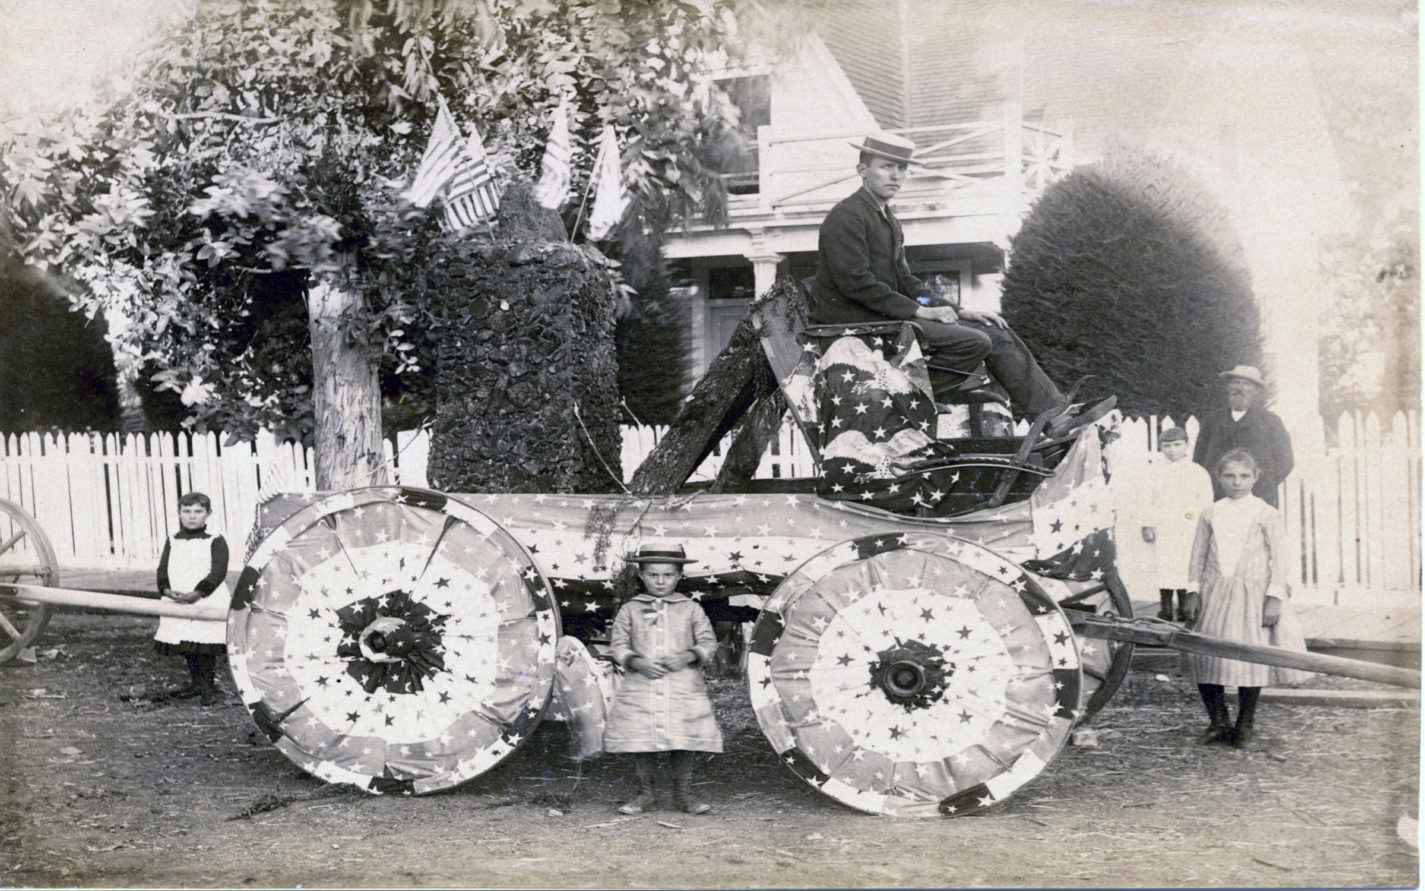 Family gathered around a Fourth of July float decorated with flags and flag bunting in front of a house circa 1880s